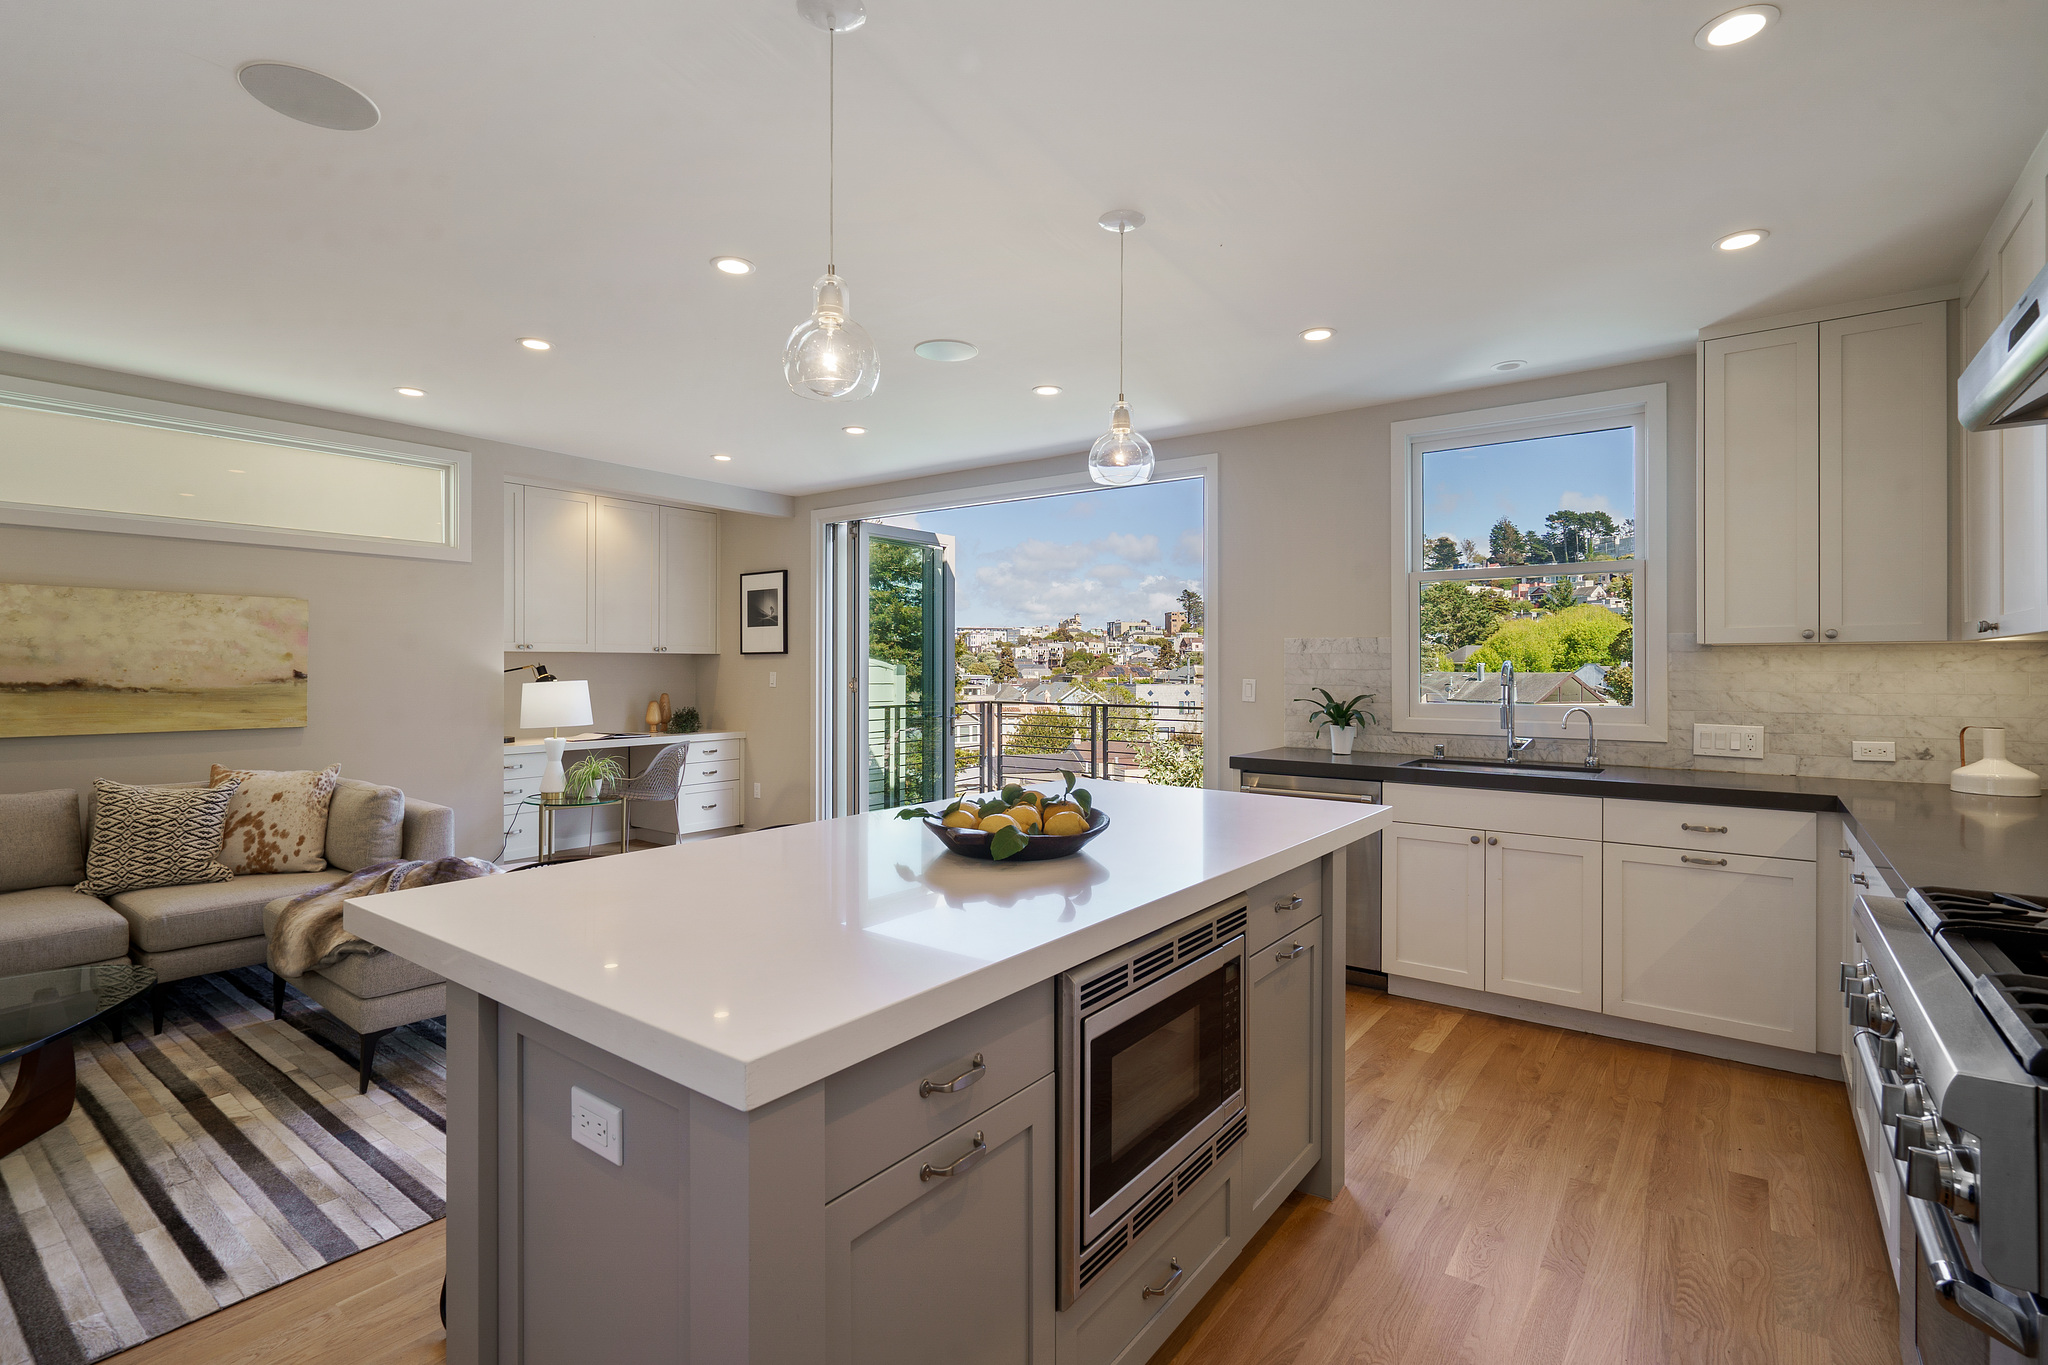 Property Photo: Kitchen island with oven and a view through open glass doors